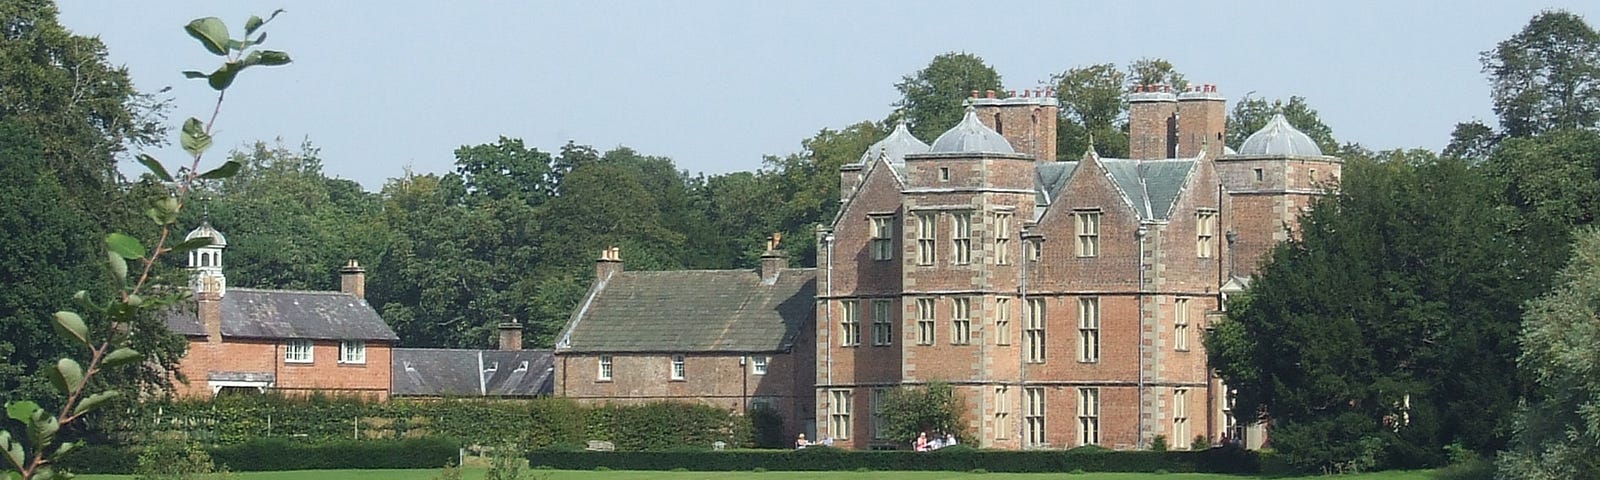 Jacobean Manor house c1620 built of red brick with lake in front.